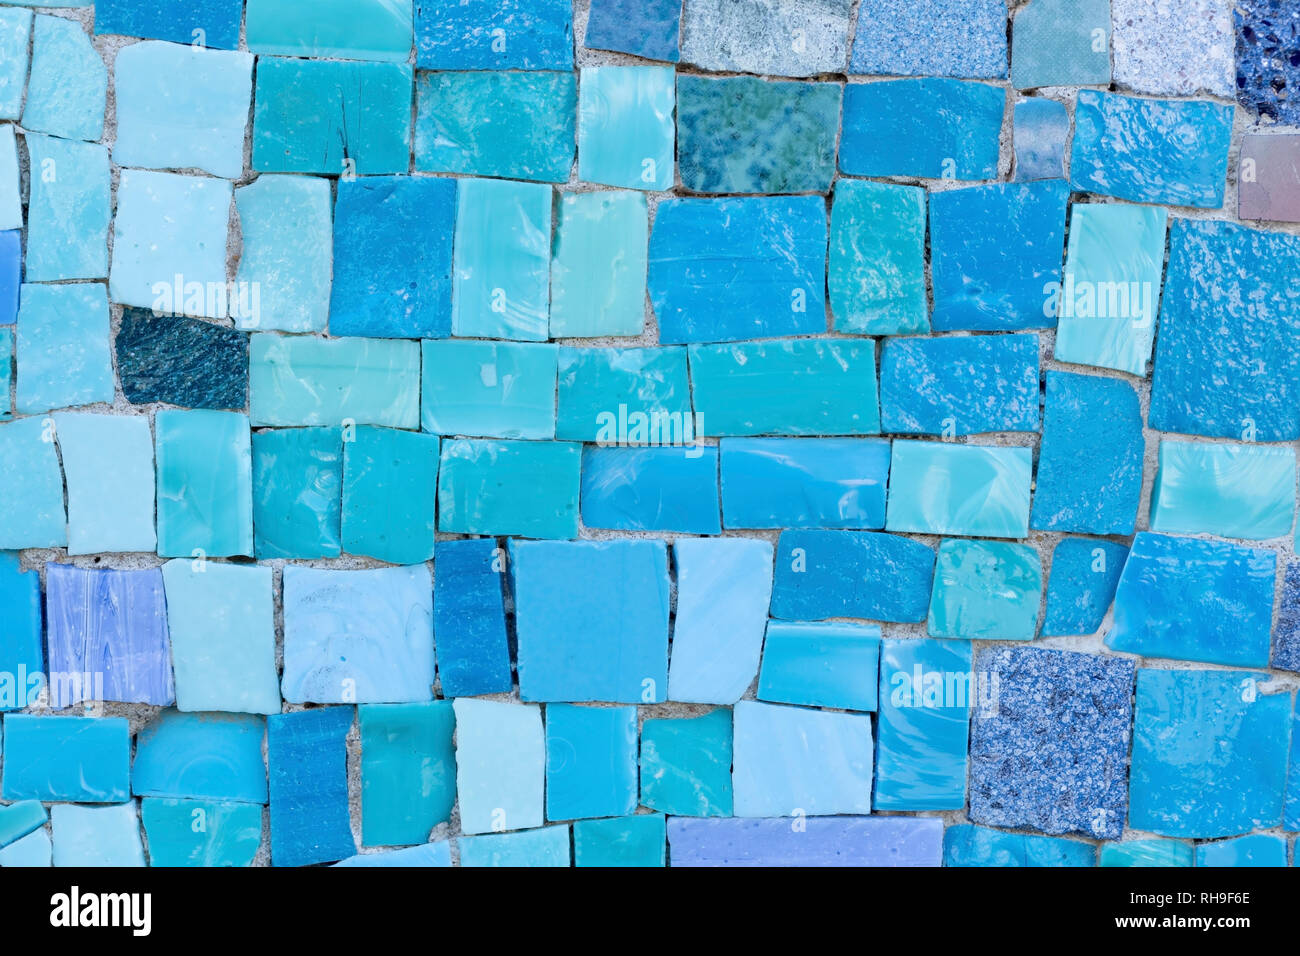 Murano tiles abstract background Stock Photo